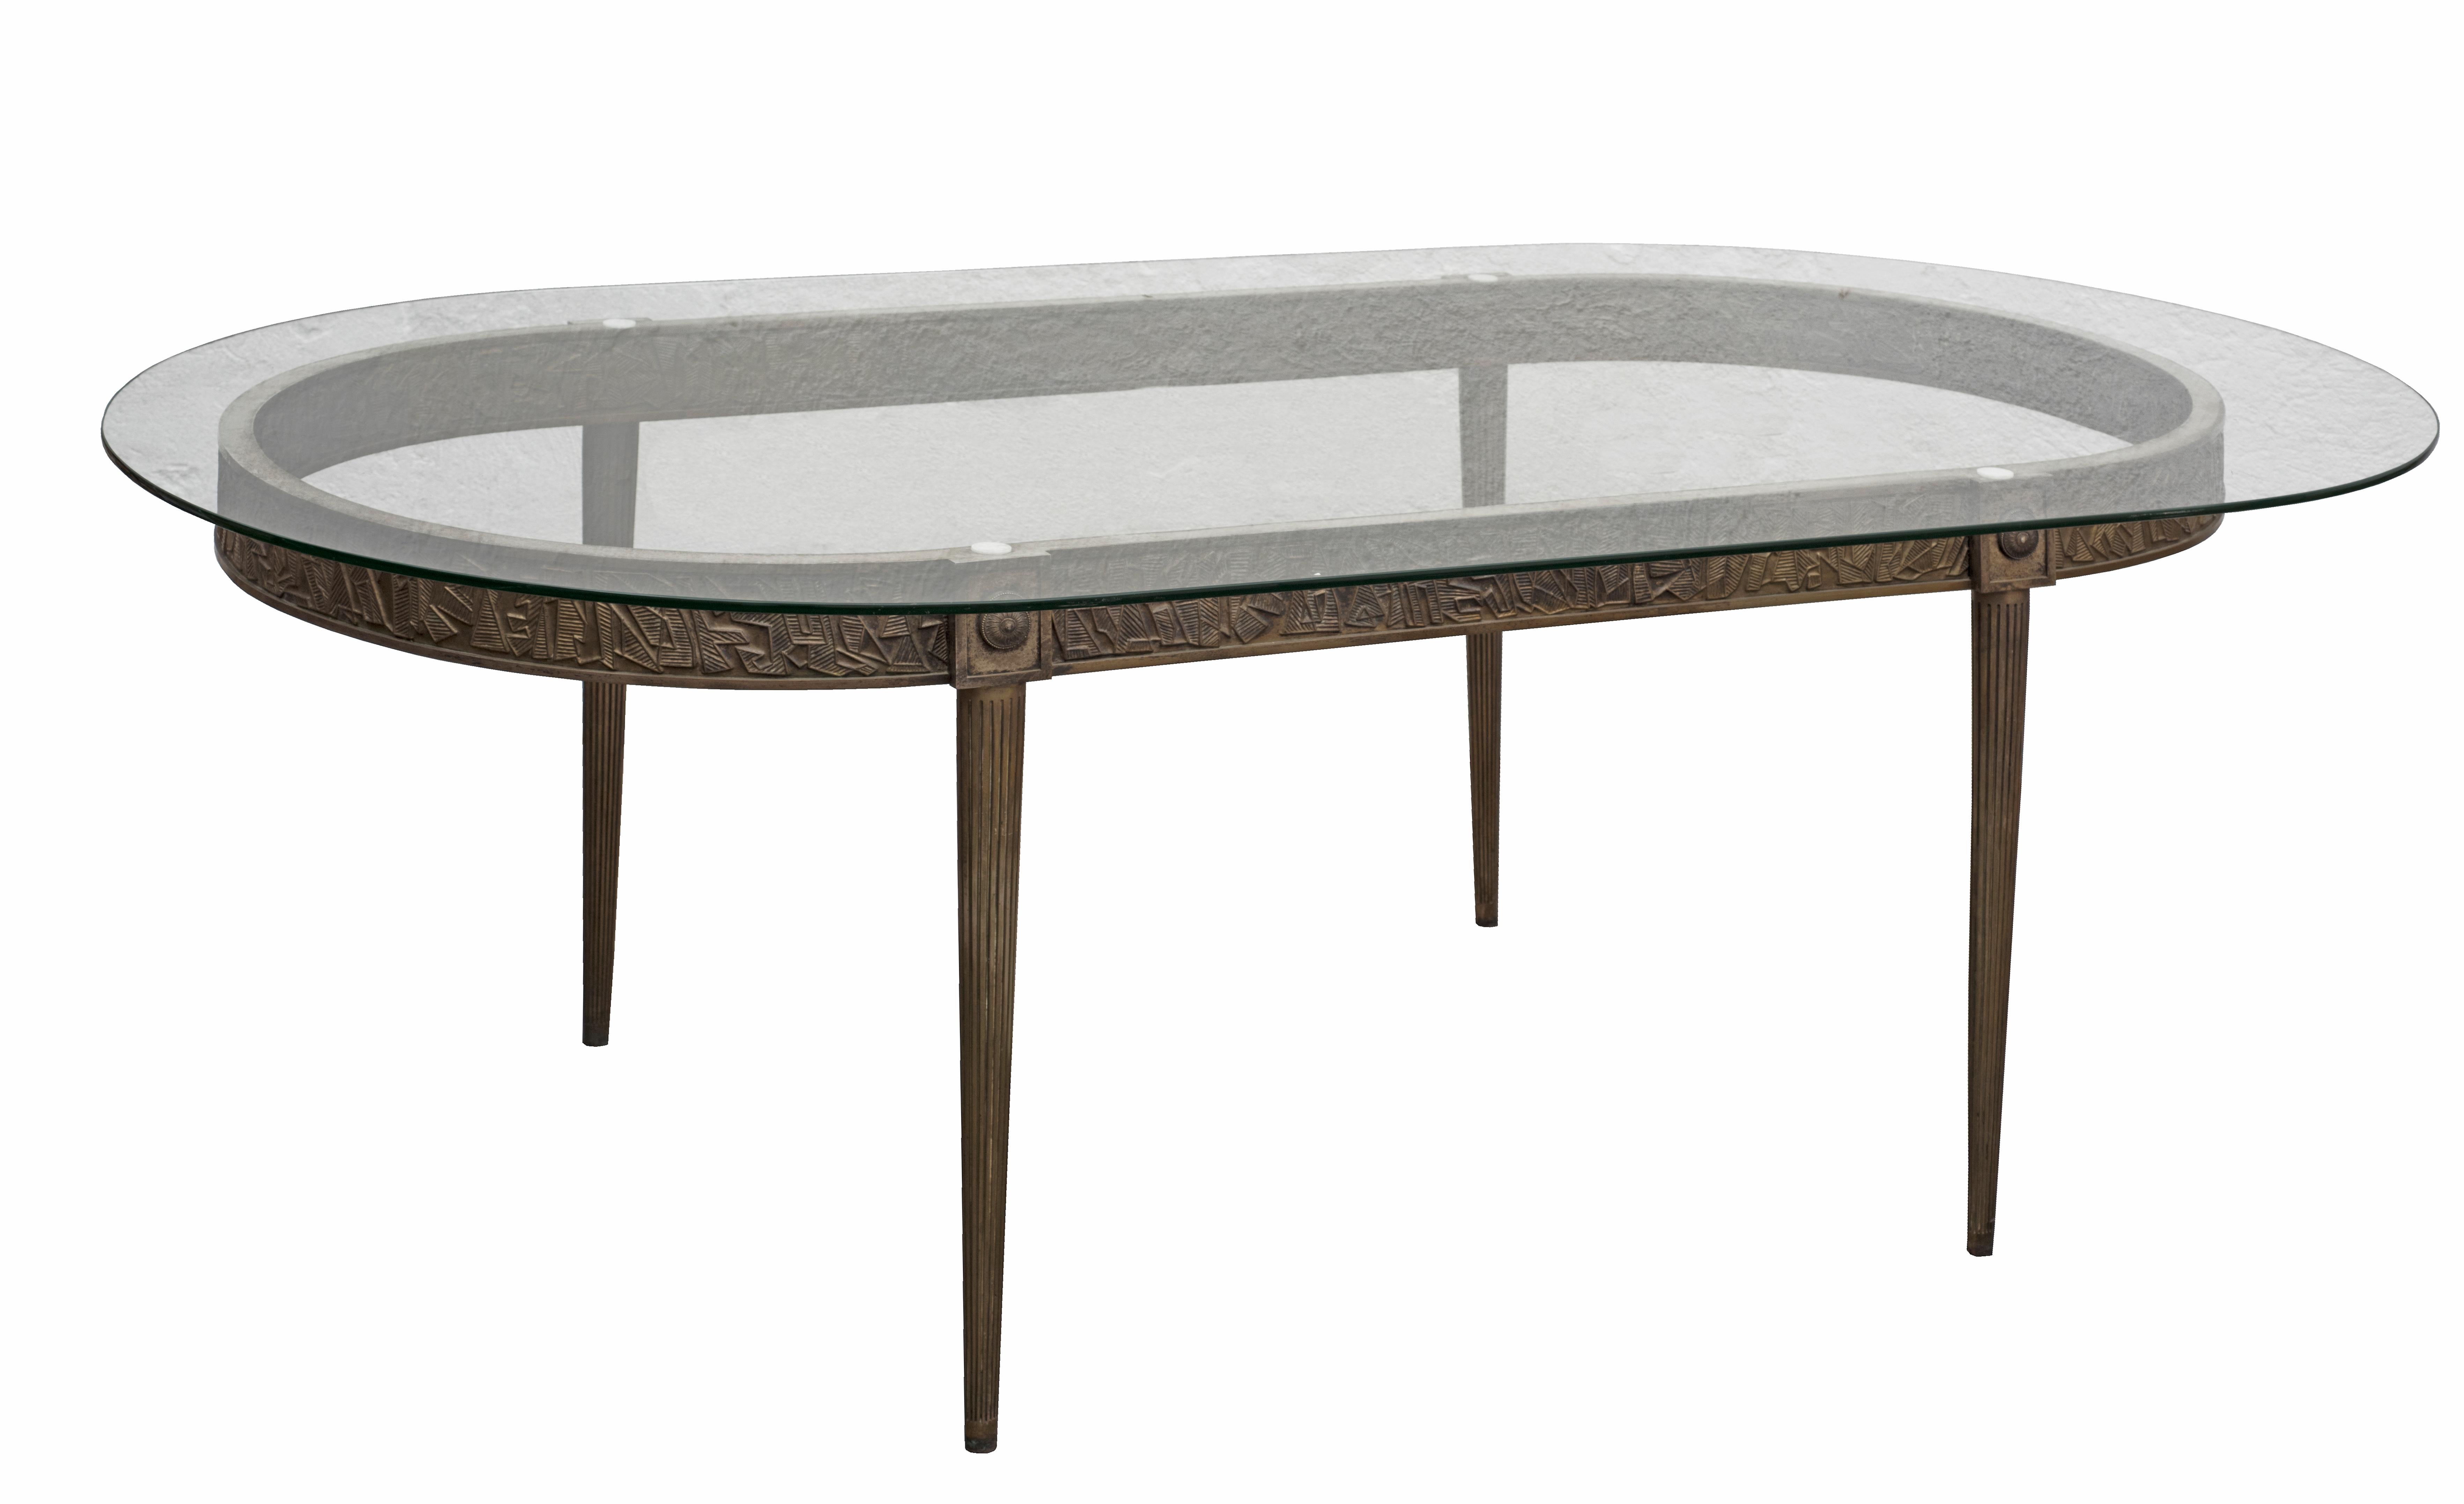 Mid-20th Century Vintage Dining Table by Augusto Vanarelli, 1958-1960 For Sale